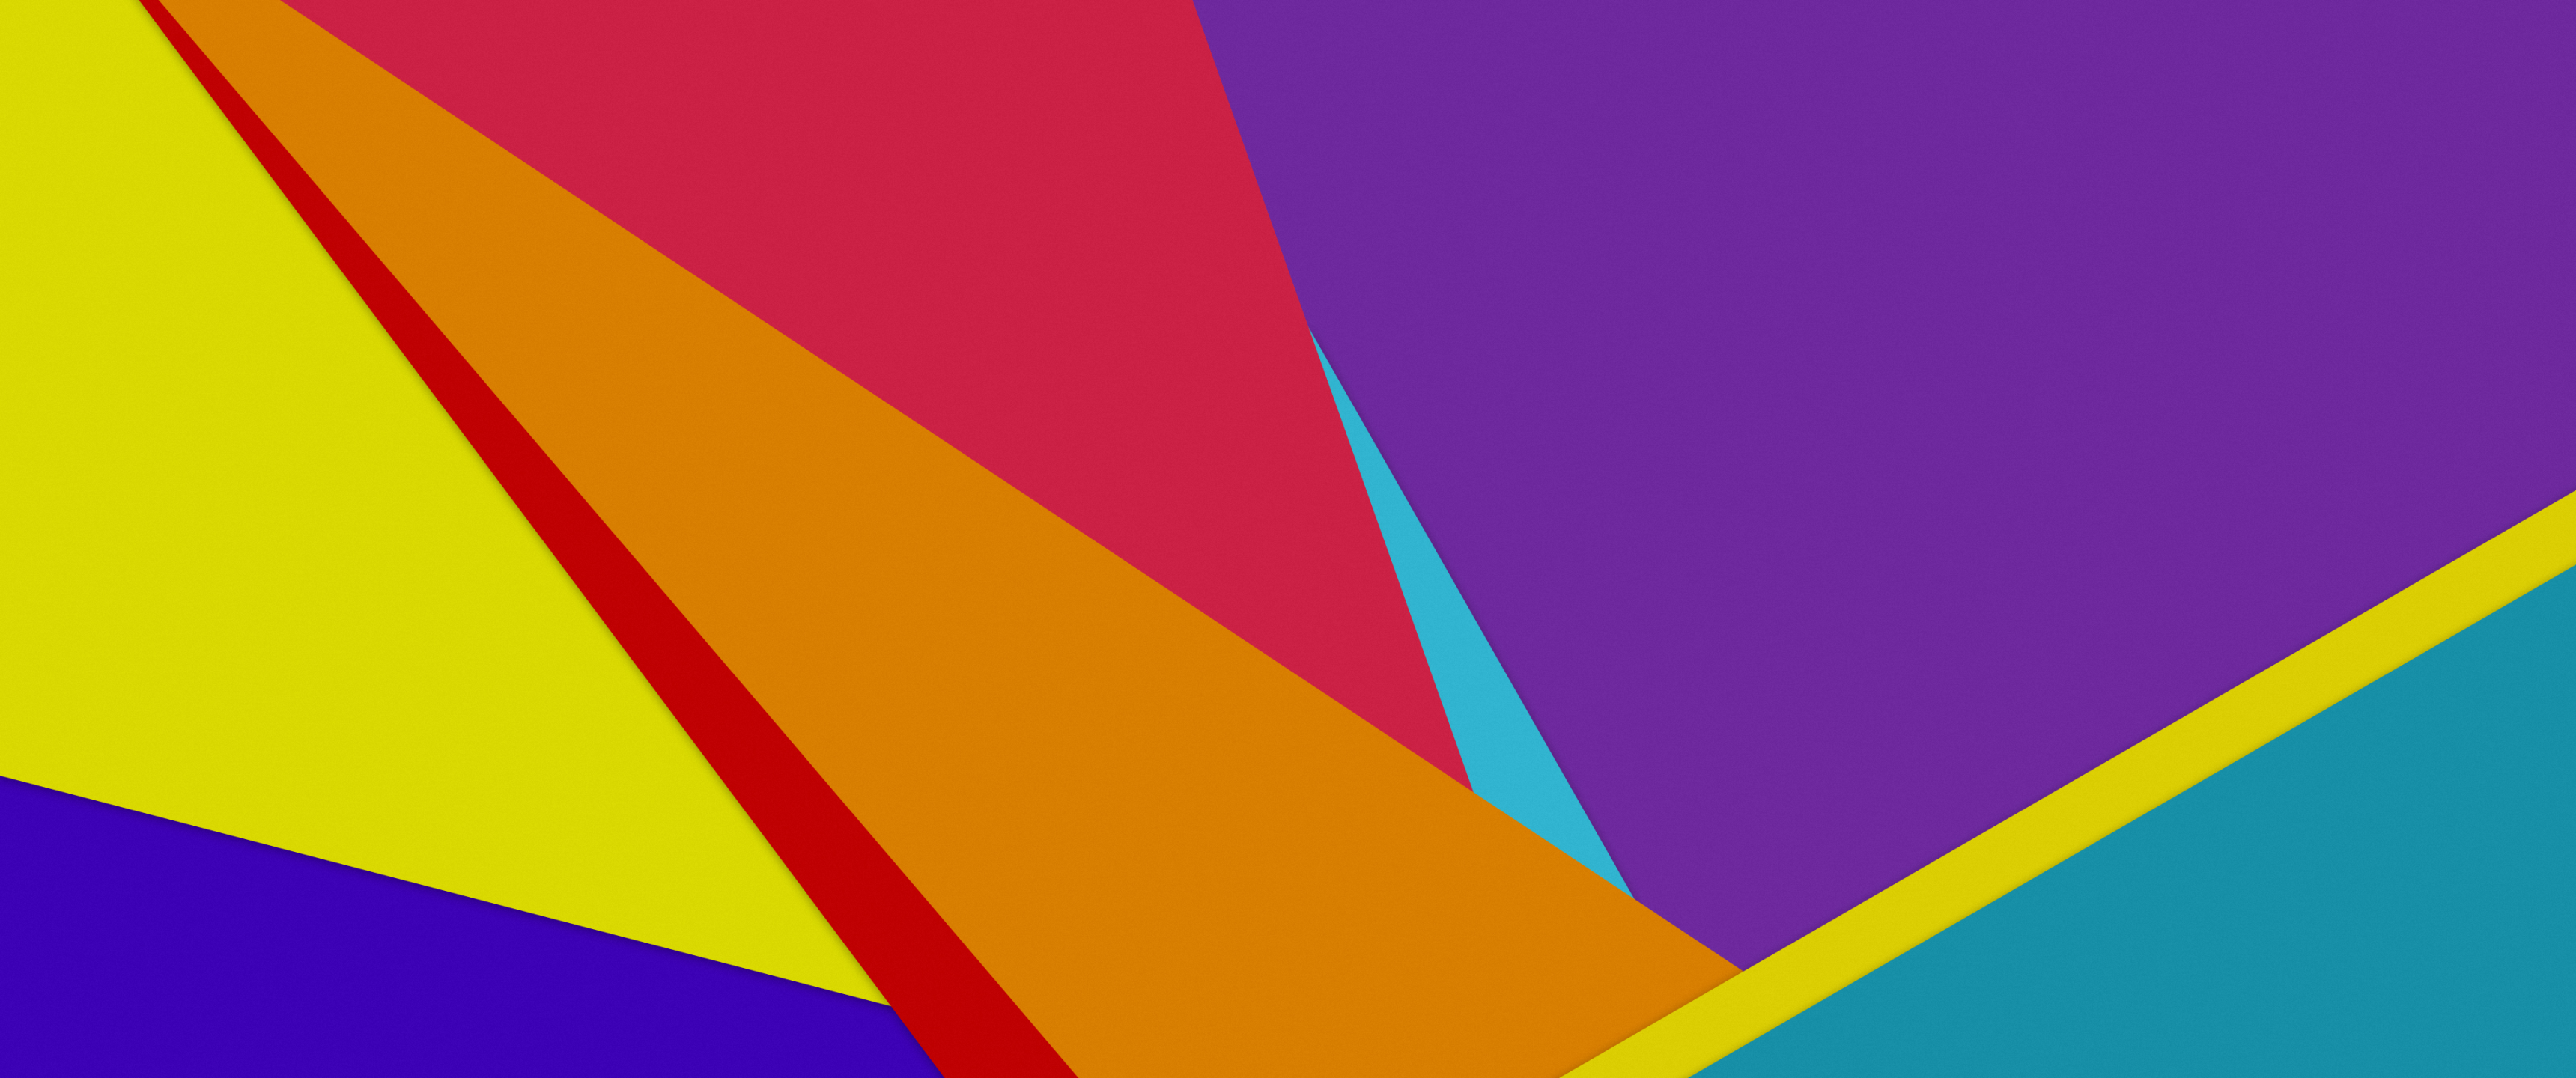 Material Design Wallpaper 4K, Multicolor, Colorful, Abstract